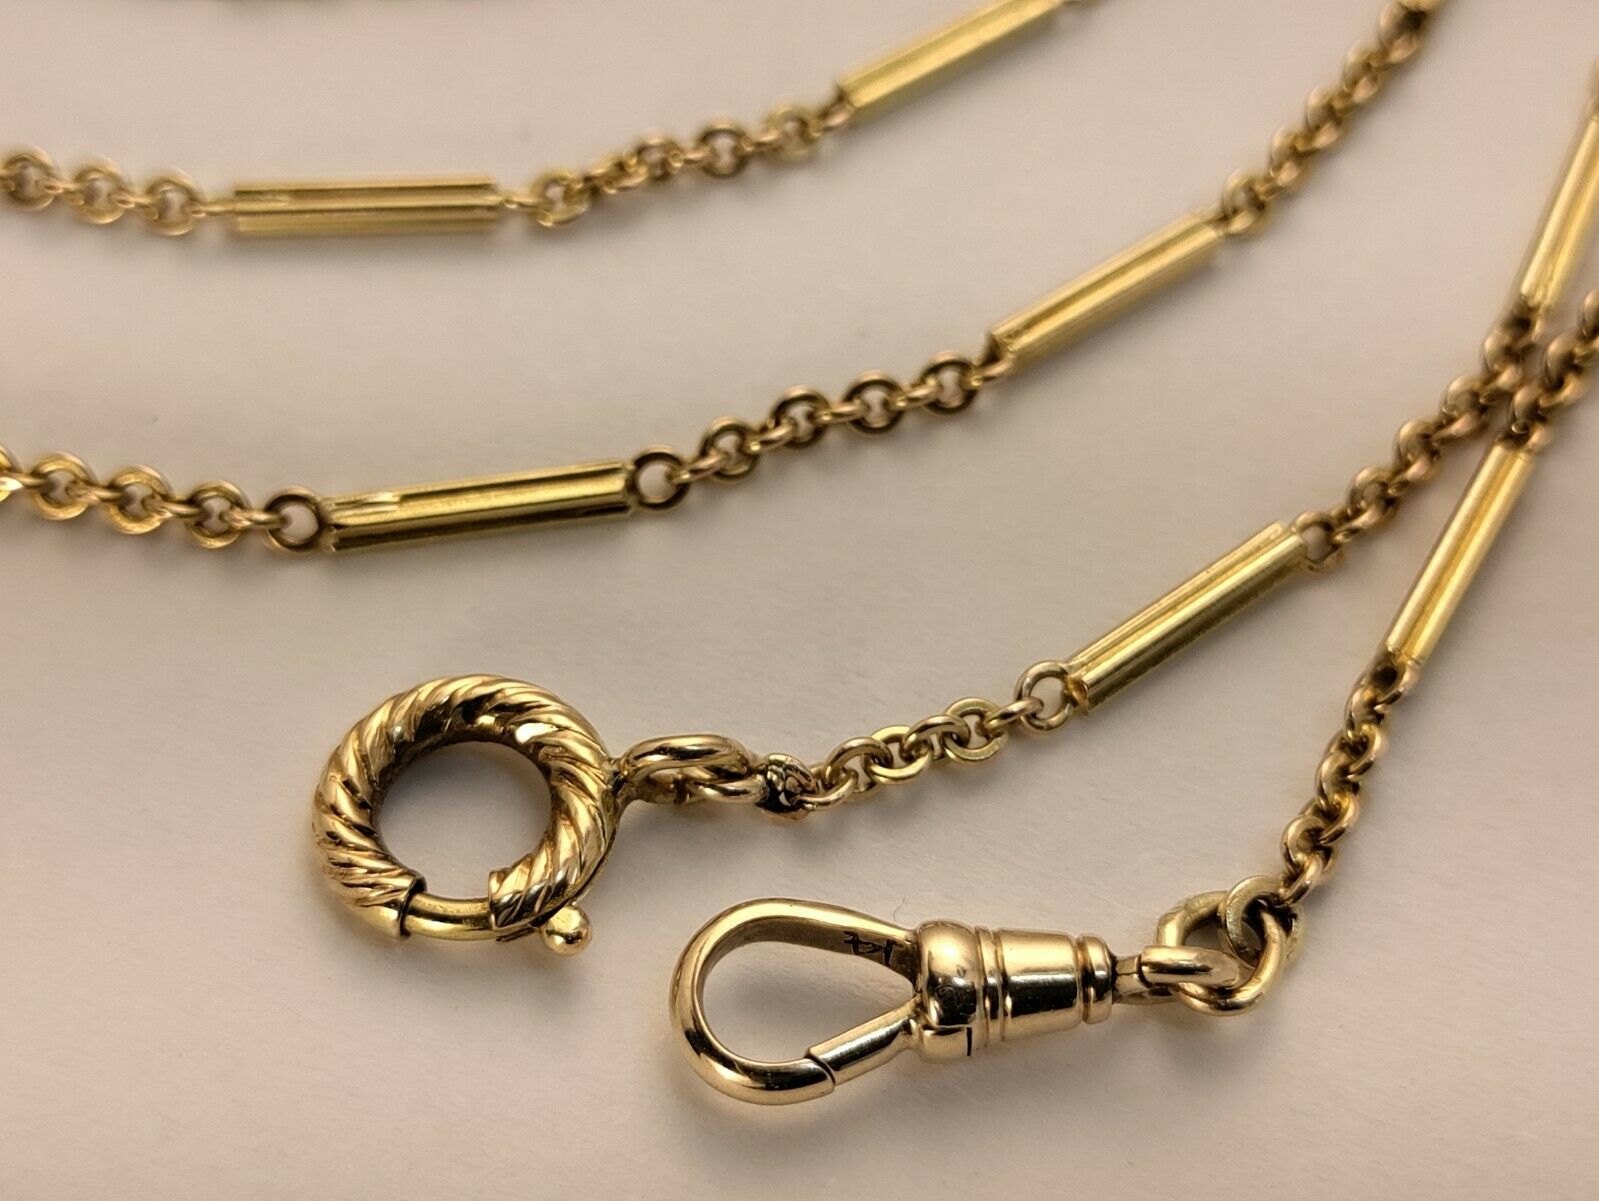 33" Victorian Solid 14k Yellow Gold 2mm Fancy Bar Watch Chain With Dog Clip